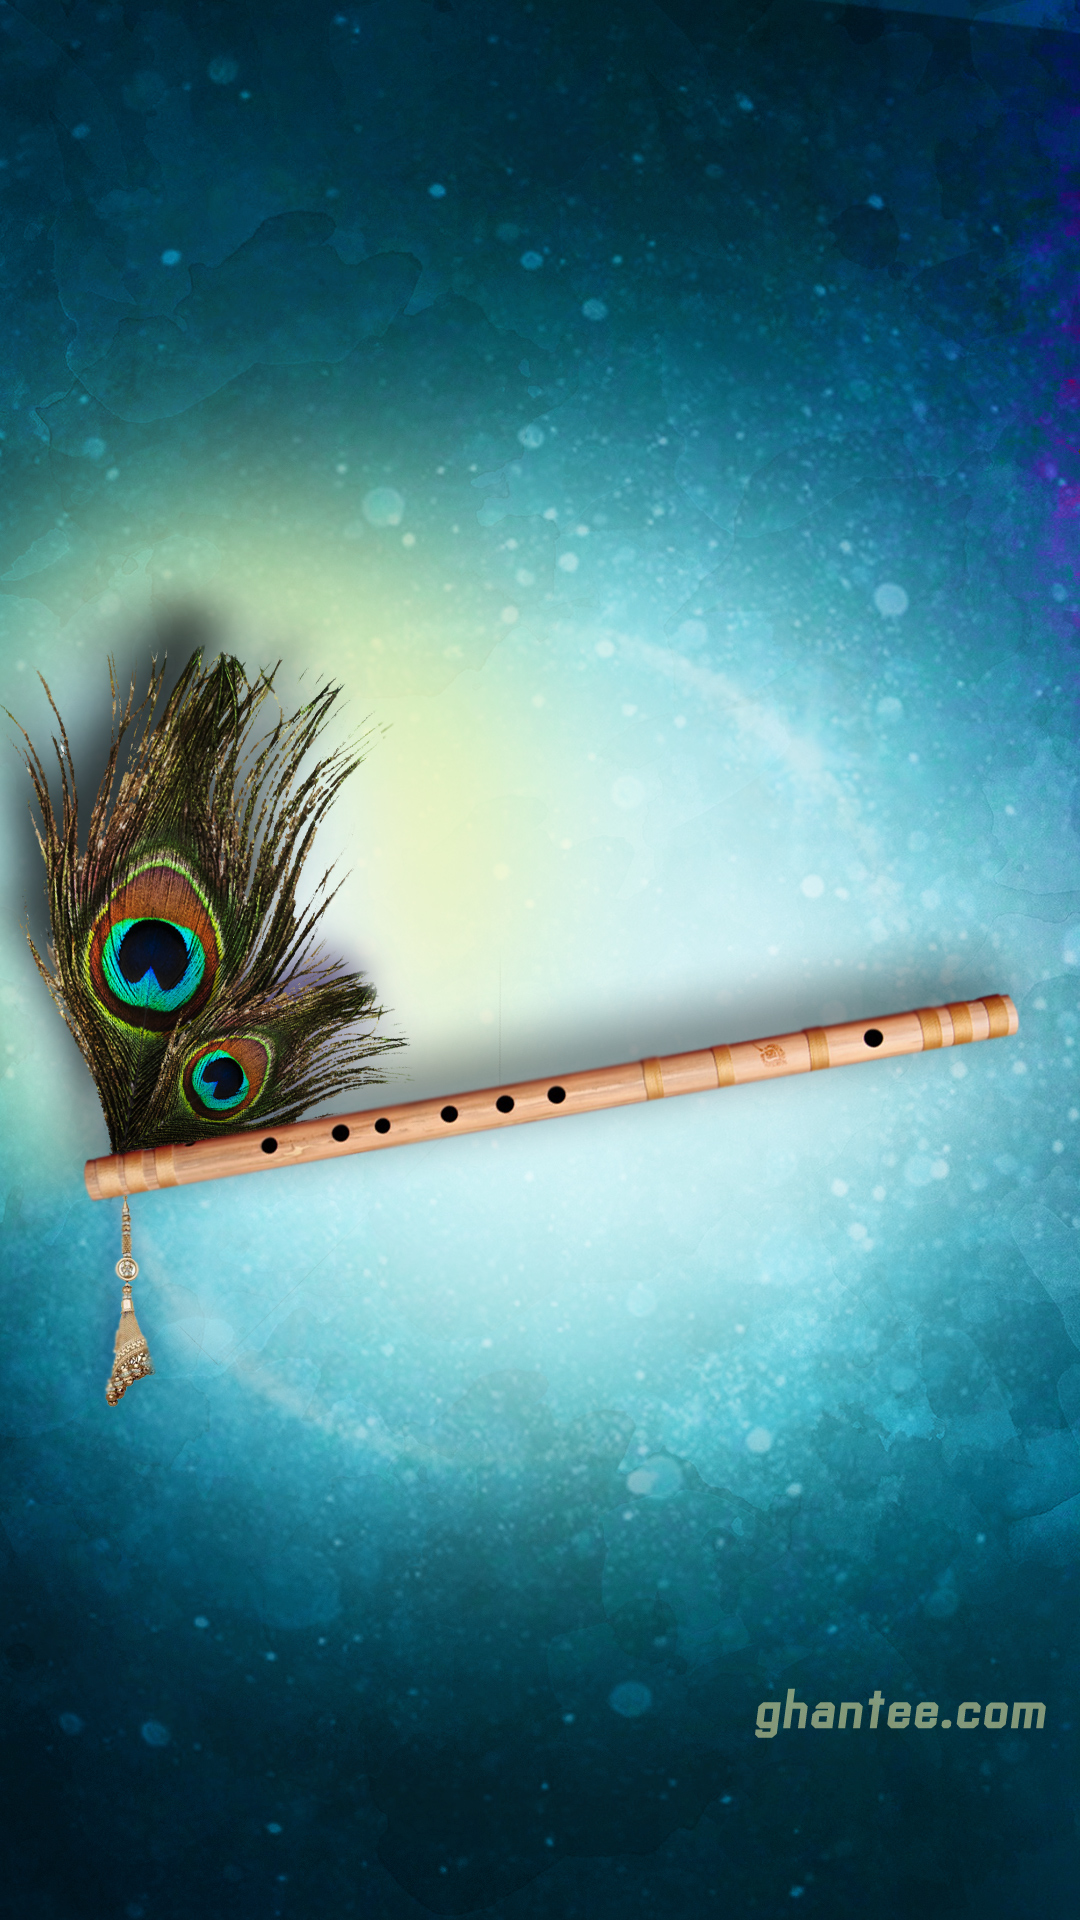 Peacock tail  Peacock feather art Lord krishna hd wallpaper Peacock  images